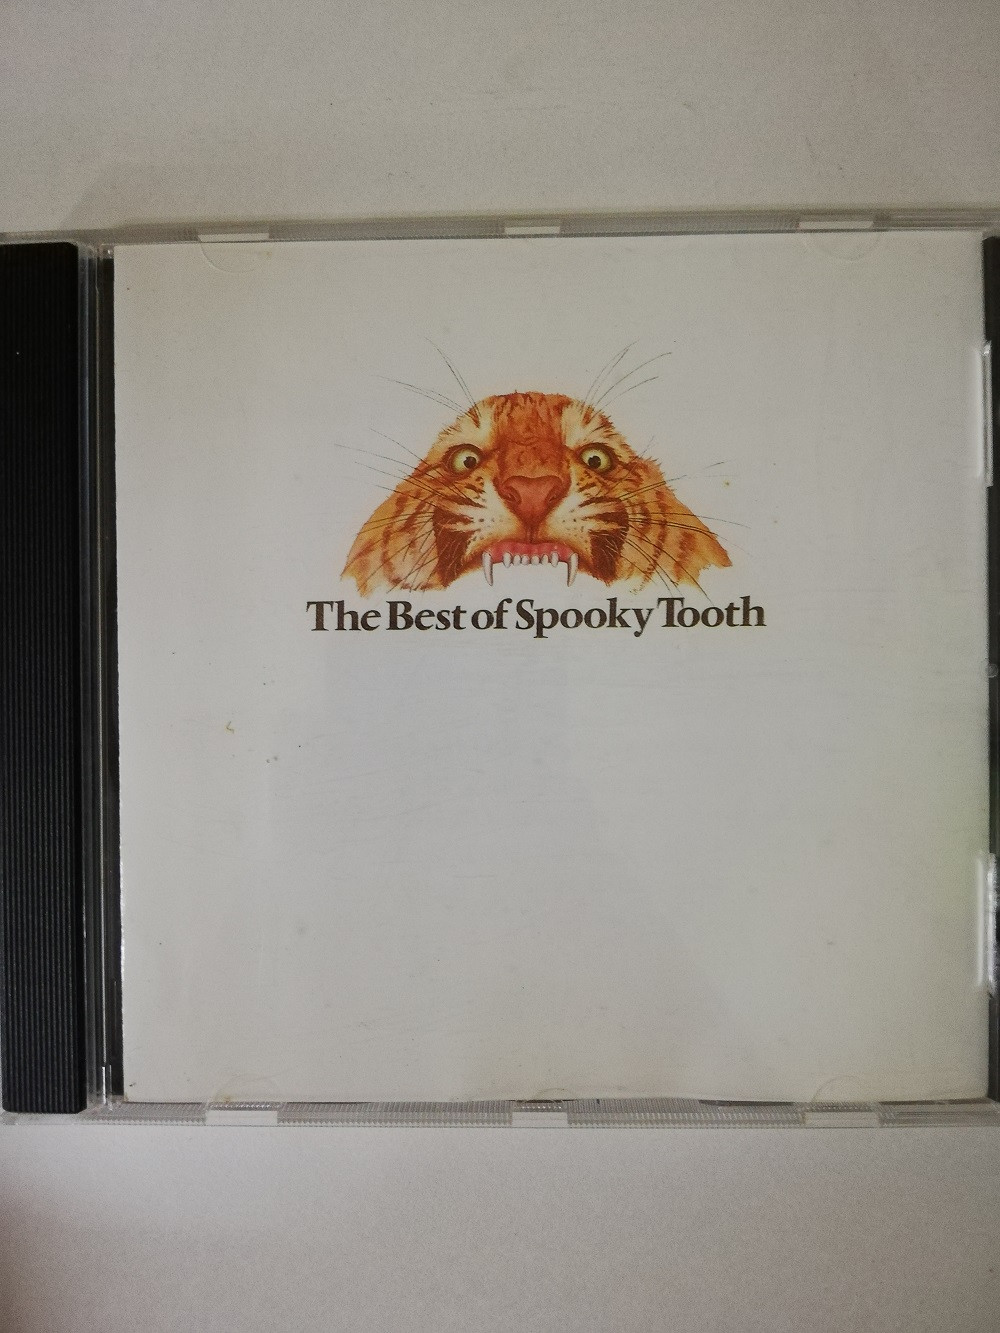 Imagen CD SPOOKY TOOTH - THE BEST OF SPOOKY TOOTH